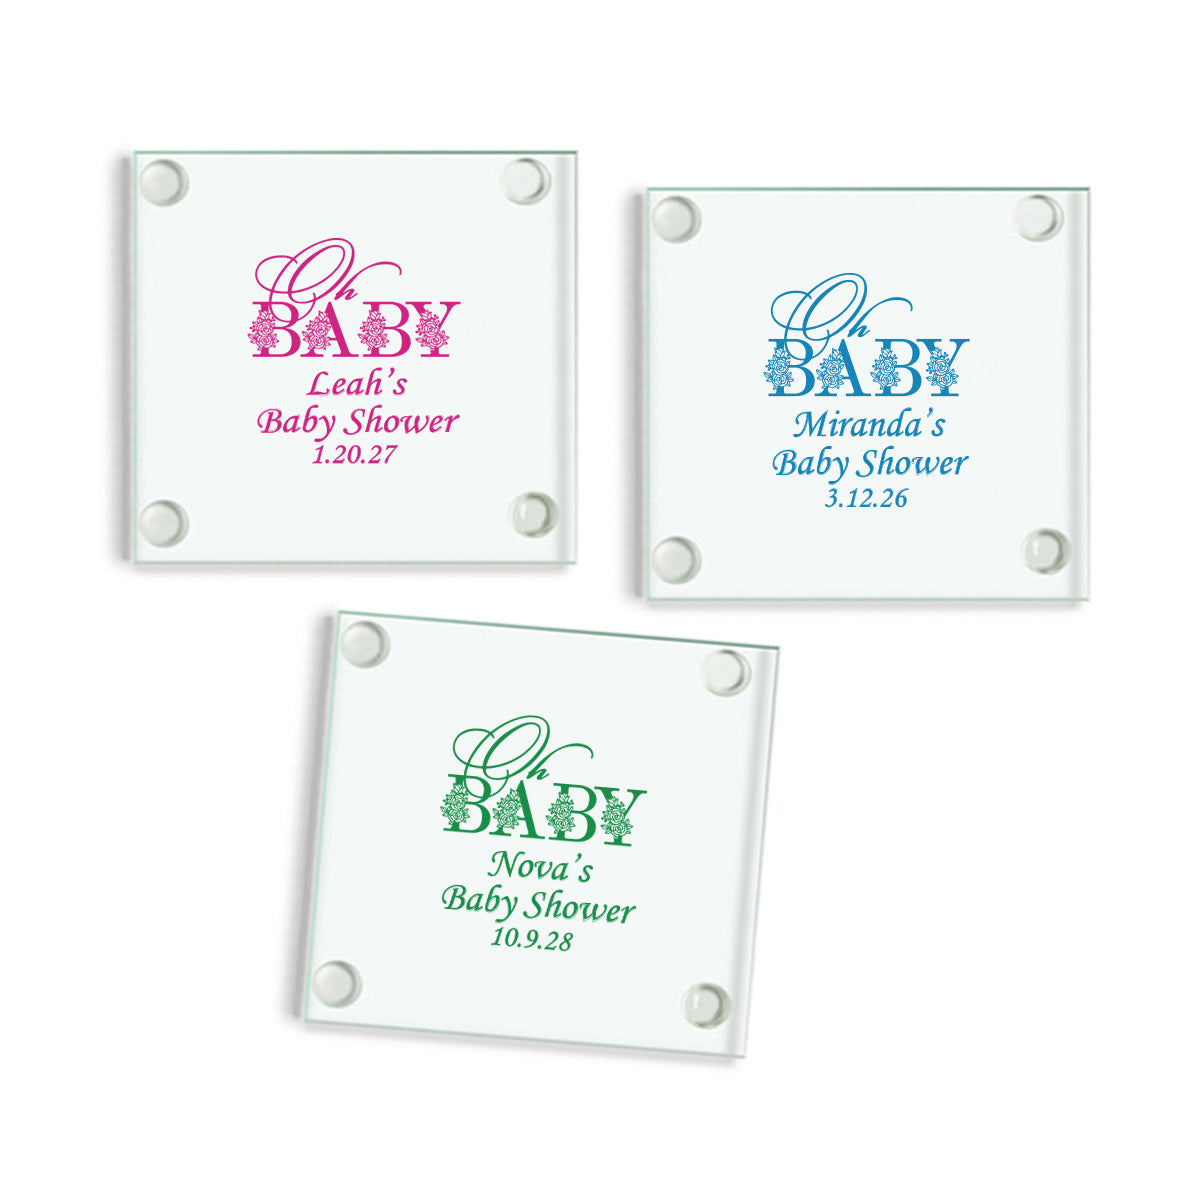 Oh Baby Personalized Glass Coaster (Set of 24)